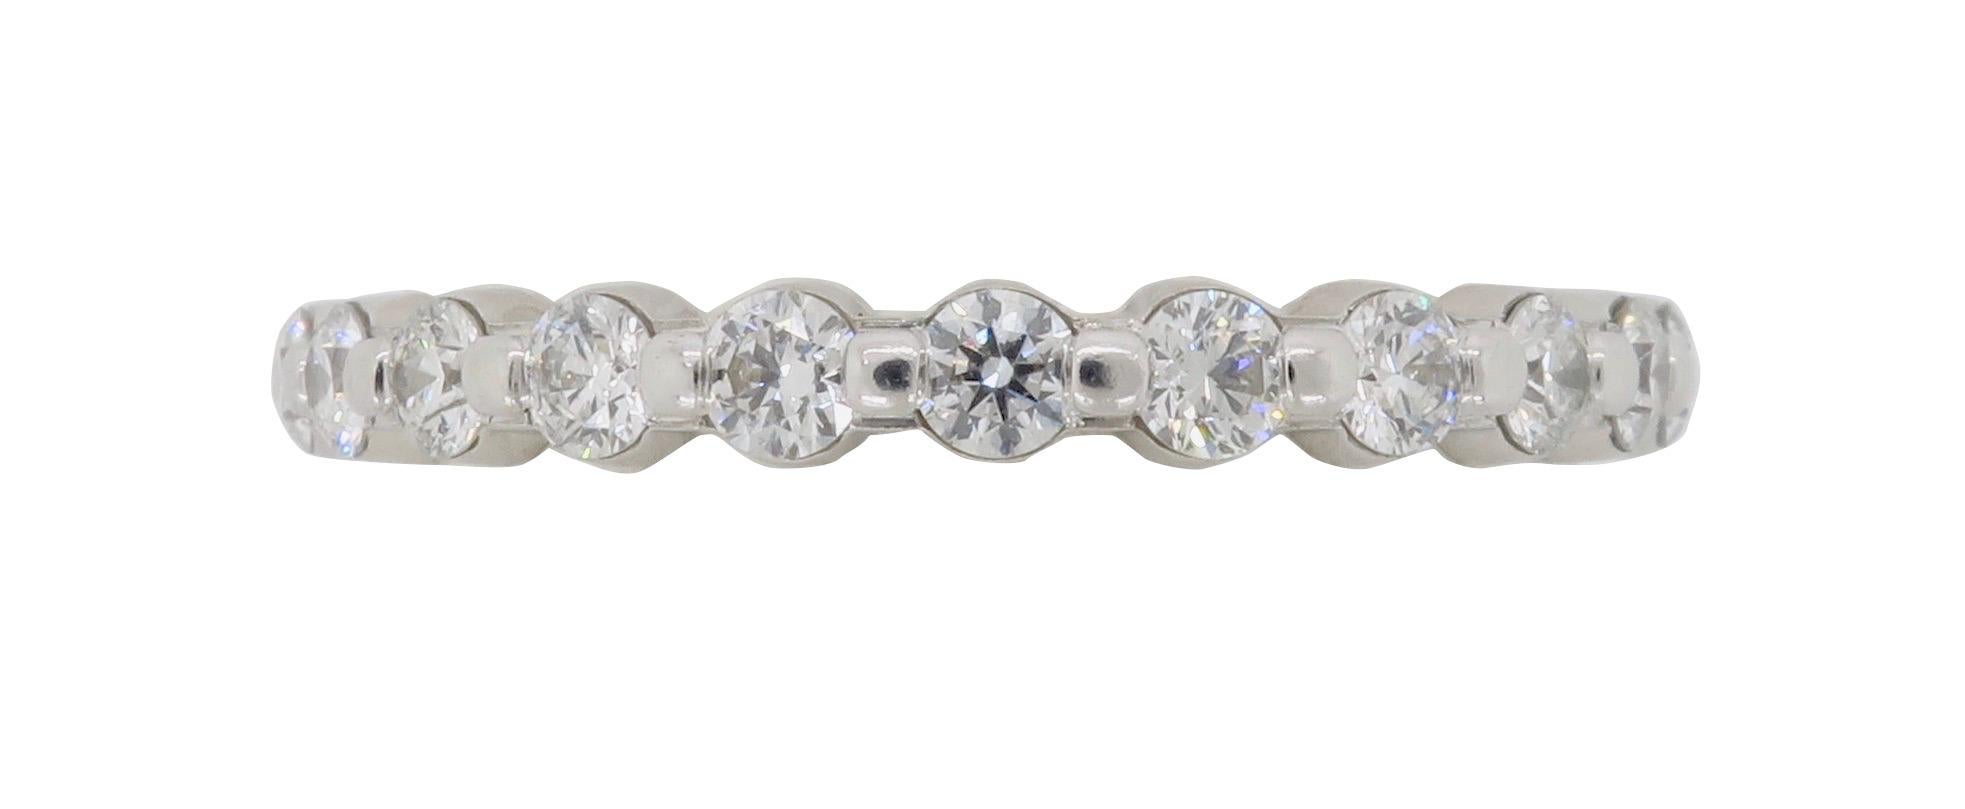 Hearts on Fire Diamond Eternity Band featuring .85ctw of Round Cut Diamonds.
Diamond Carat Weight: Approximately .85 CTW
Diamond Cut: Hearts on Fire Round Cut Diamonds
Color: Average  G-I
Clarity: Average VS1-SI1
Metal: 18K White Gold
Marked/Tested: